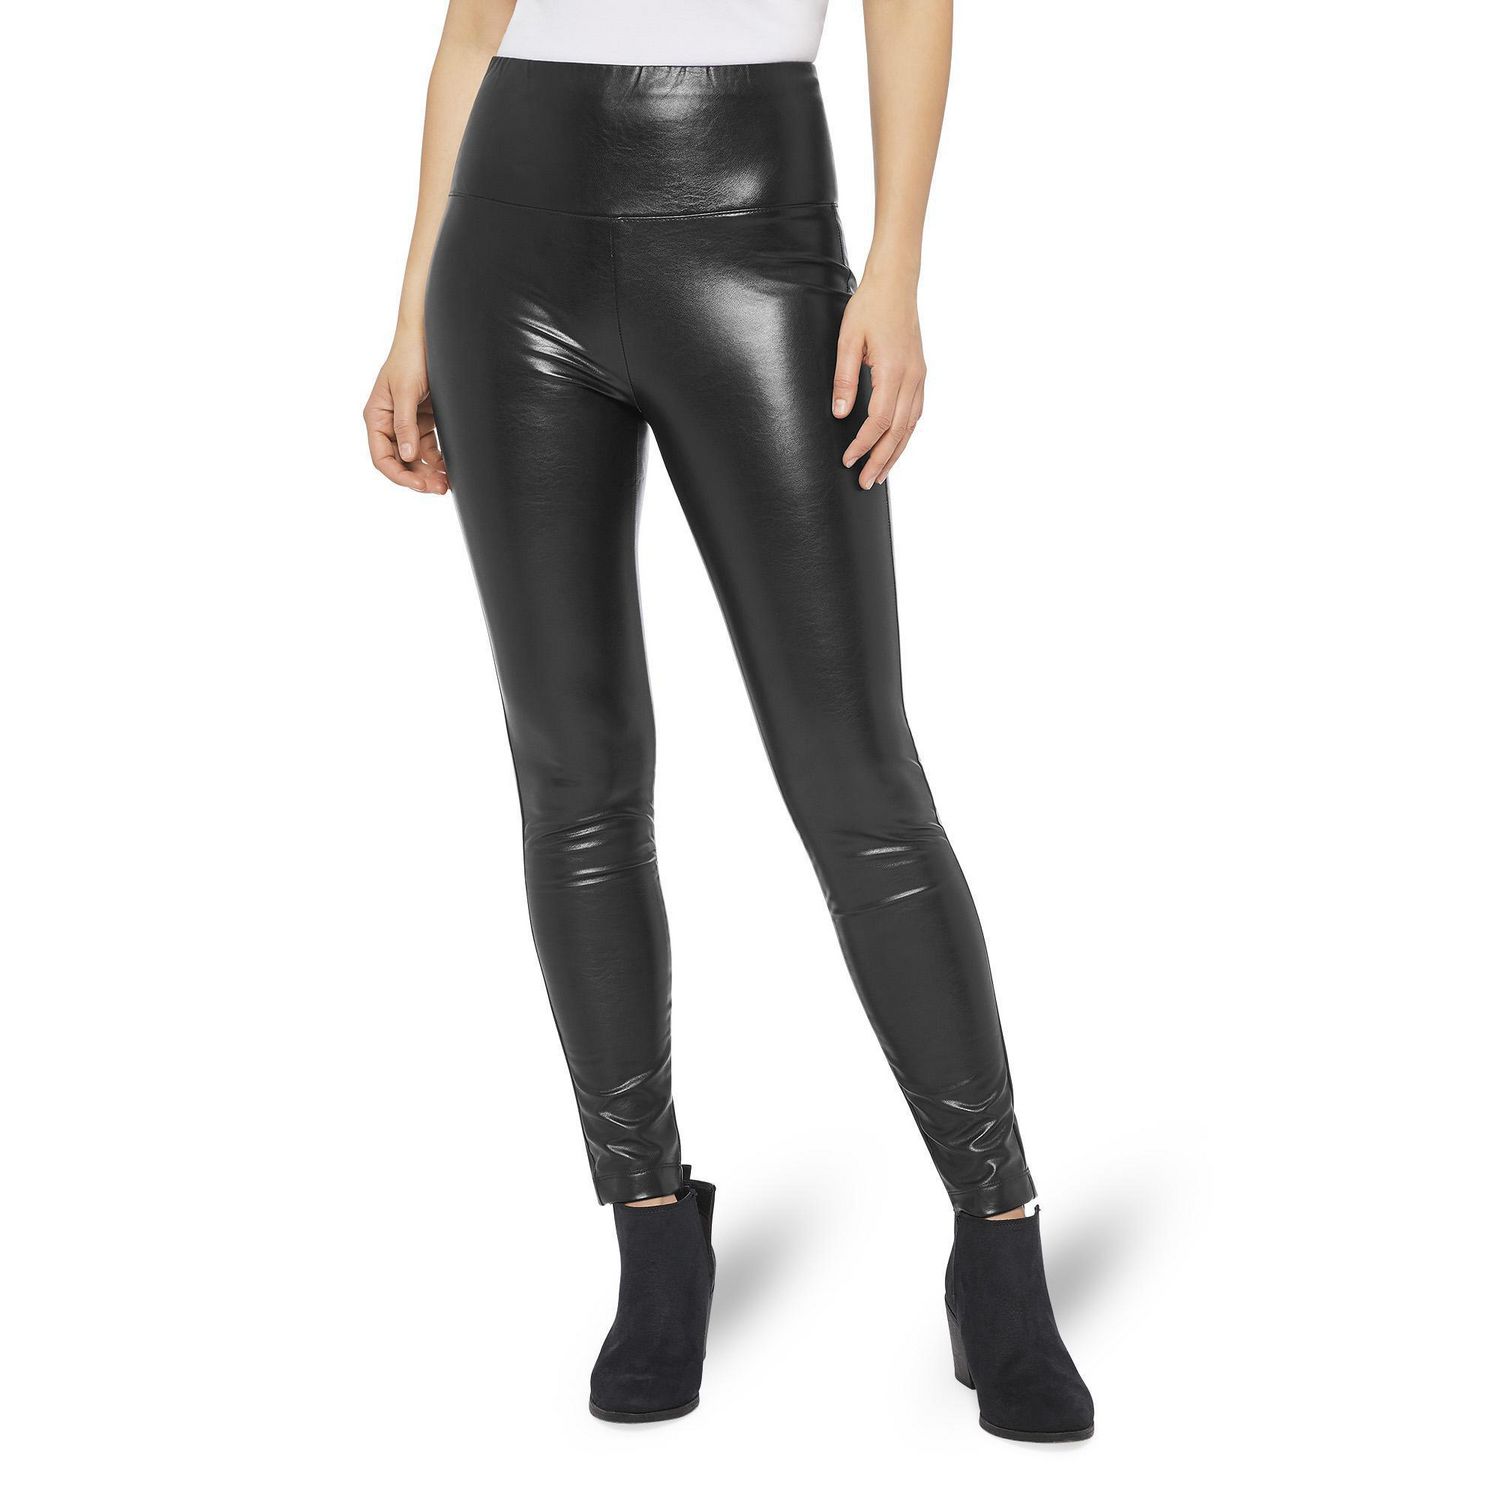 Retro Gong Black Faux Leather Leggings for Women High Waisted